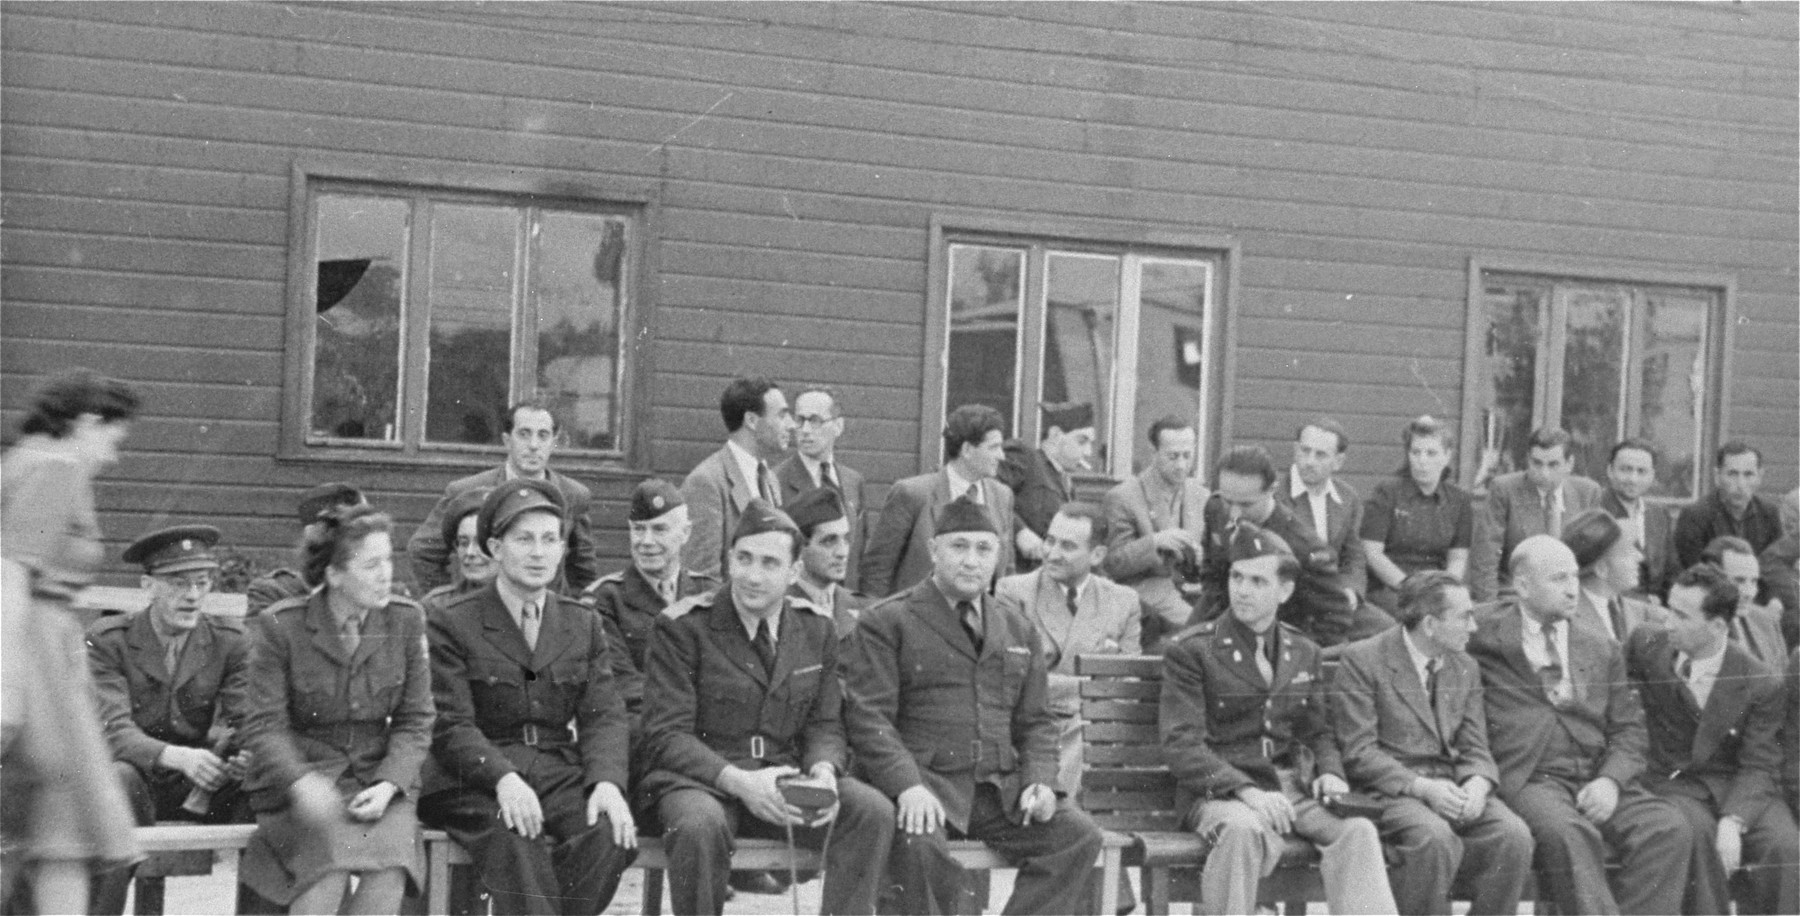 Officials of various agencies attend a ceremony at the Schlachtensee displaced persons camp in Berlin.  

Among those pictured in the front row are: Chaim Chonowitz of the Jewish Agency for Palestine (second from the left); Eli Rock, JDC director for Berlin (third from the left); Harold Fishbein, UNRRA director of the Schlachtensee camp (fourth from the left); Chaplain Mayer Abramowitz (fifth from the left) and Szwartzberg, president of the central committee of Schlachtensee.